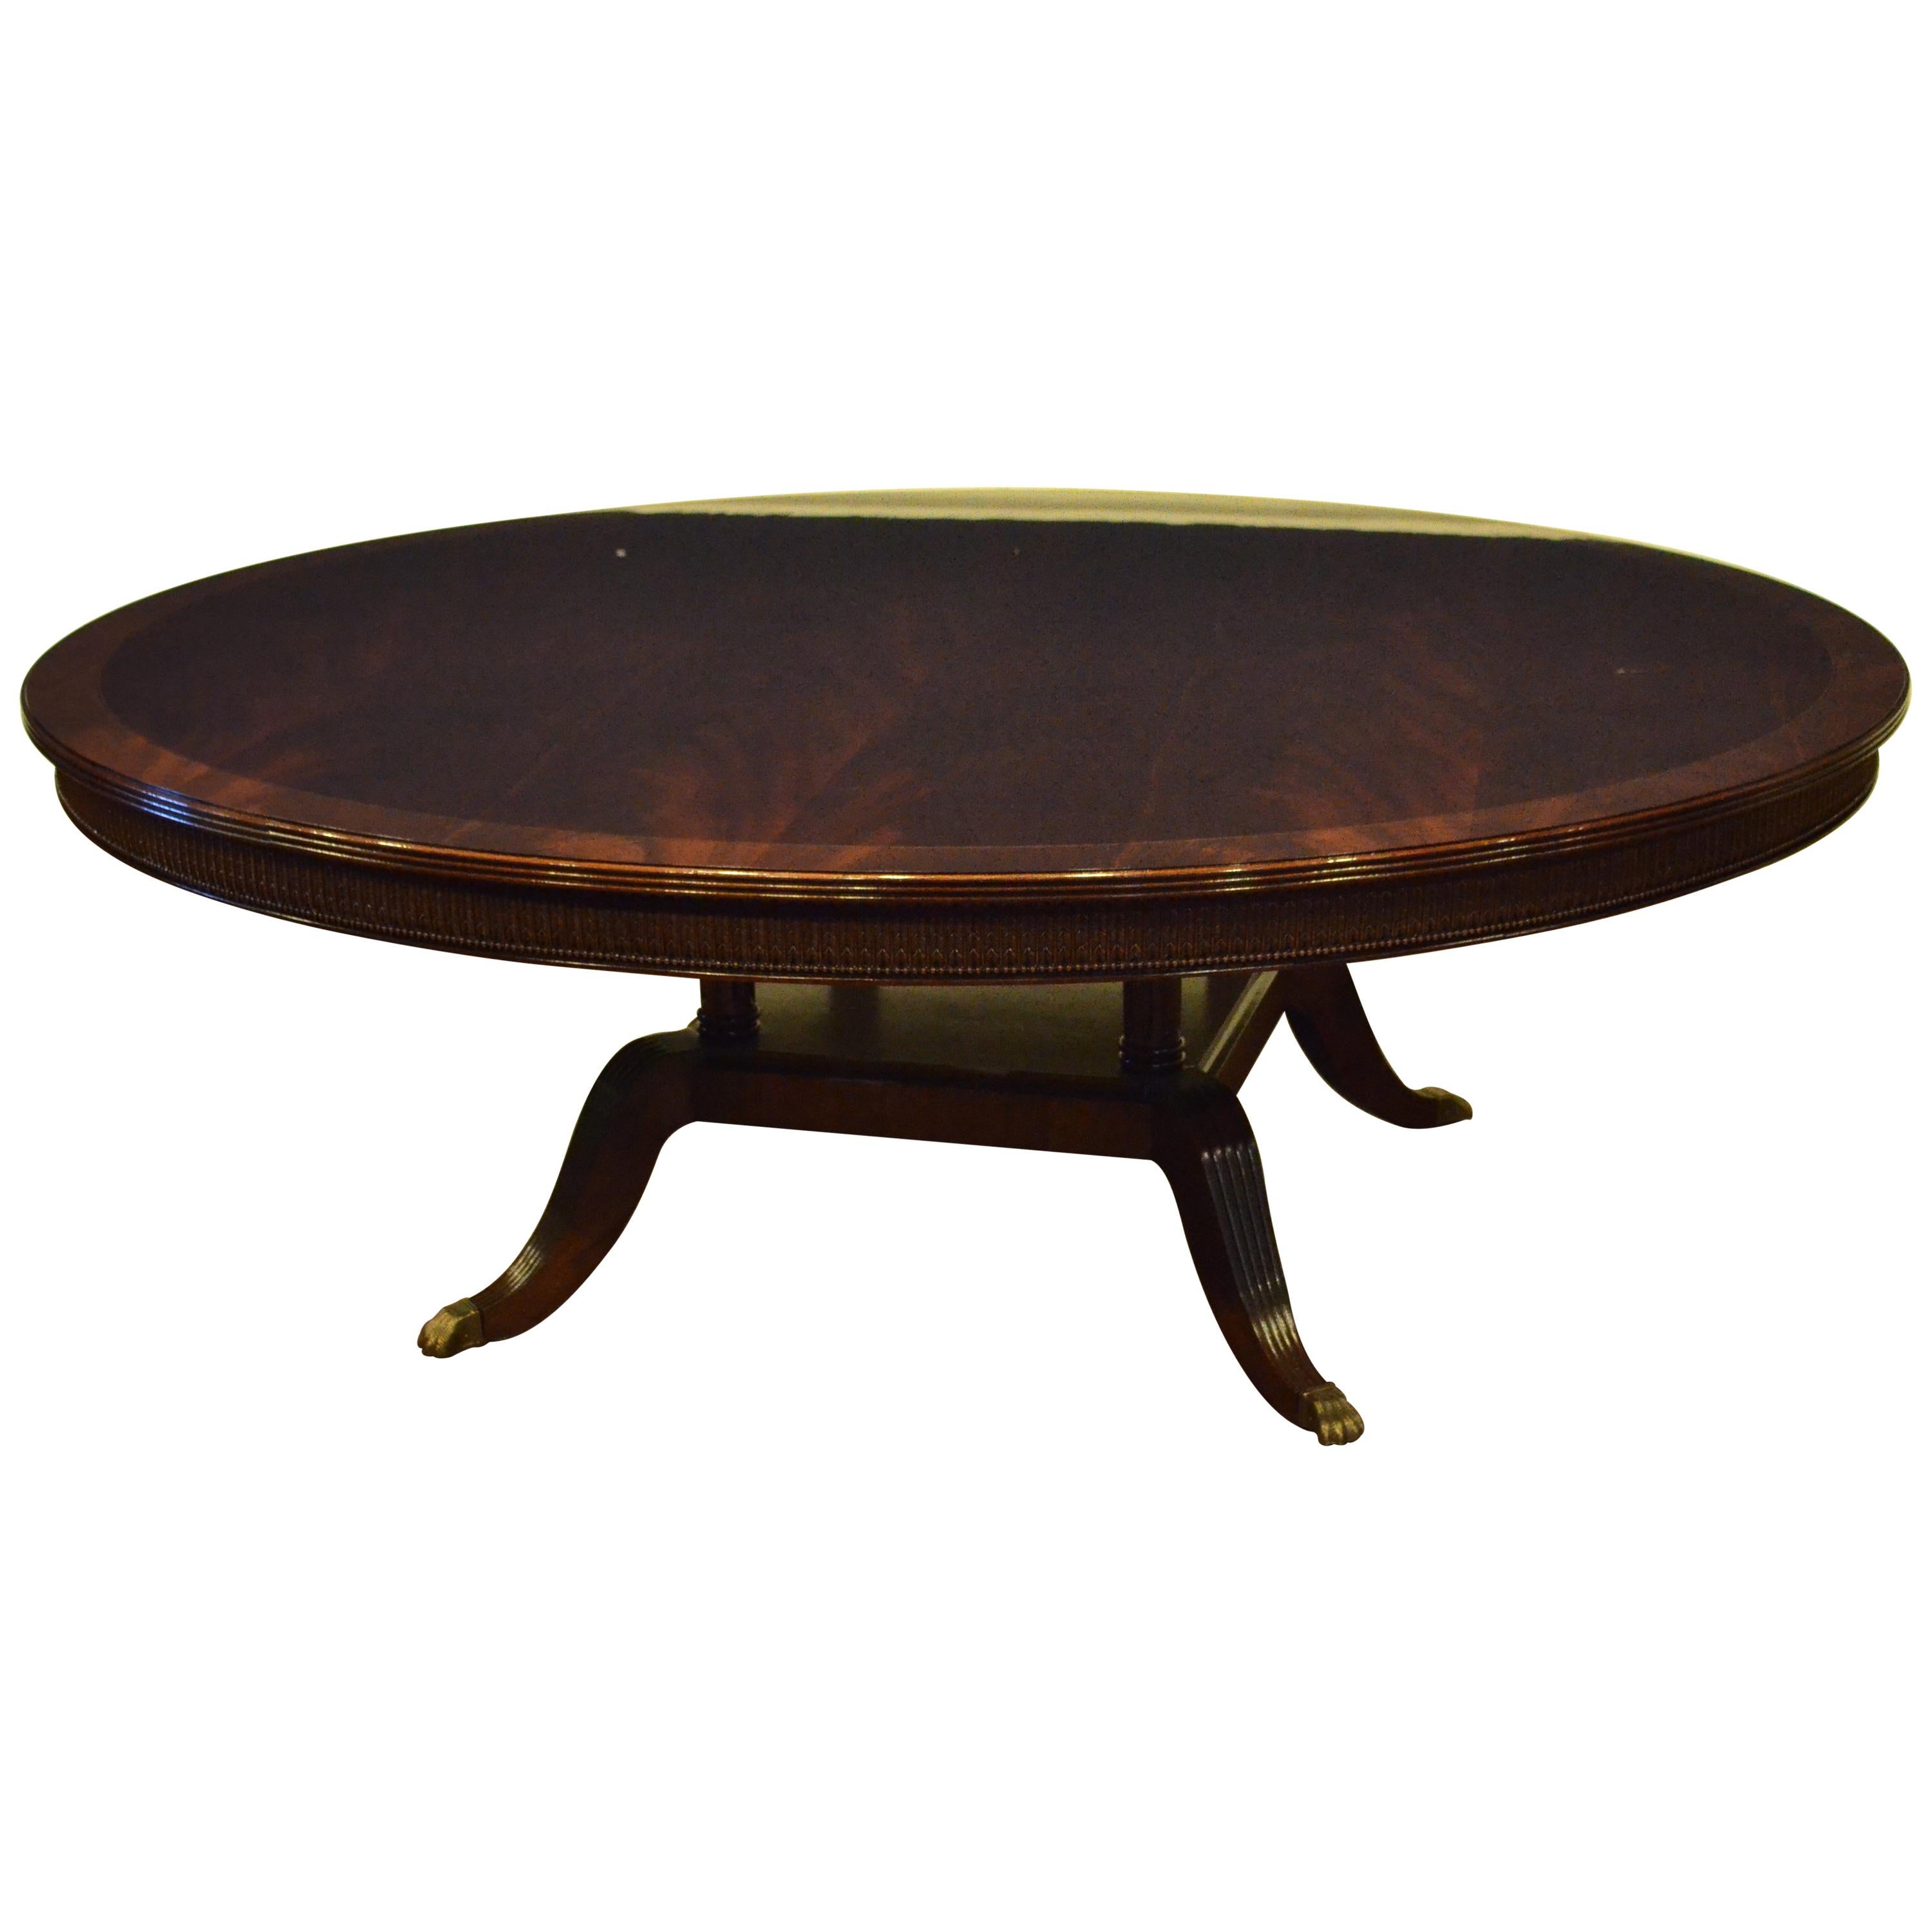 Large Round Crotch Mahogany Regency Style Dining Table by Leighton Hall